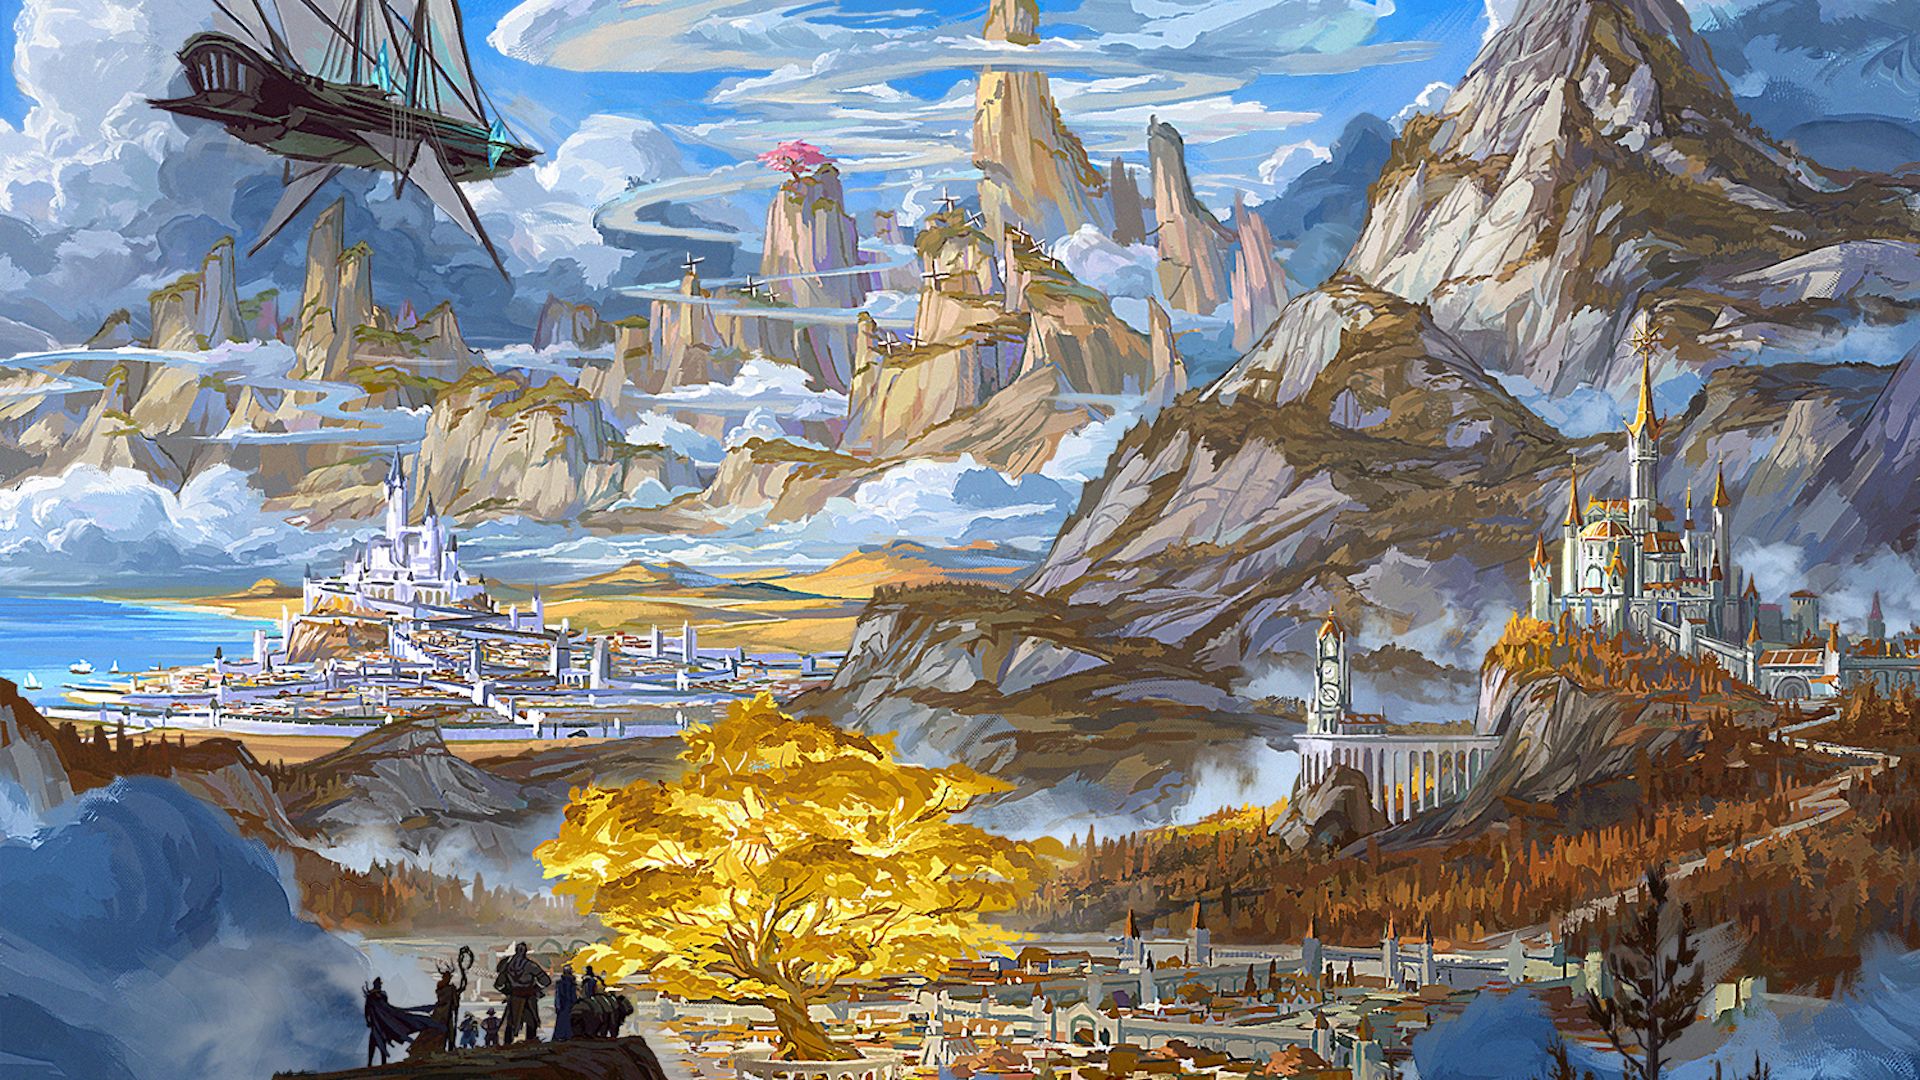 A group of heroes look over a picturesque landscape of mountains, cities and a massive golden tree. This is the artwork for Welcome to Tal'dorei, the first record from Critical Role's new record label Scanlan Shorthalt Music.